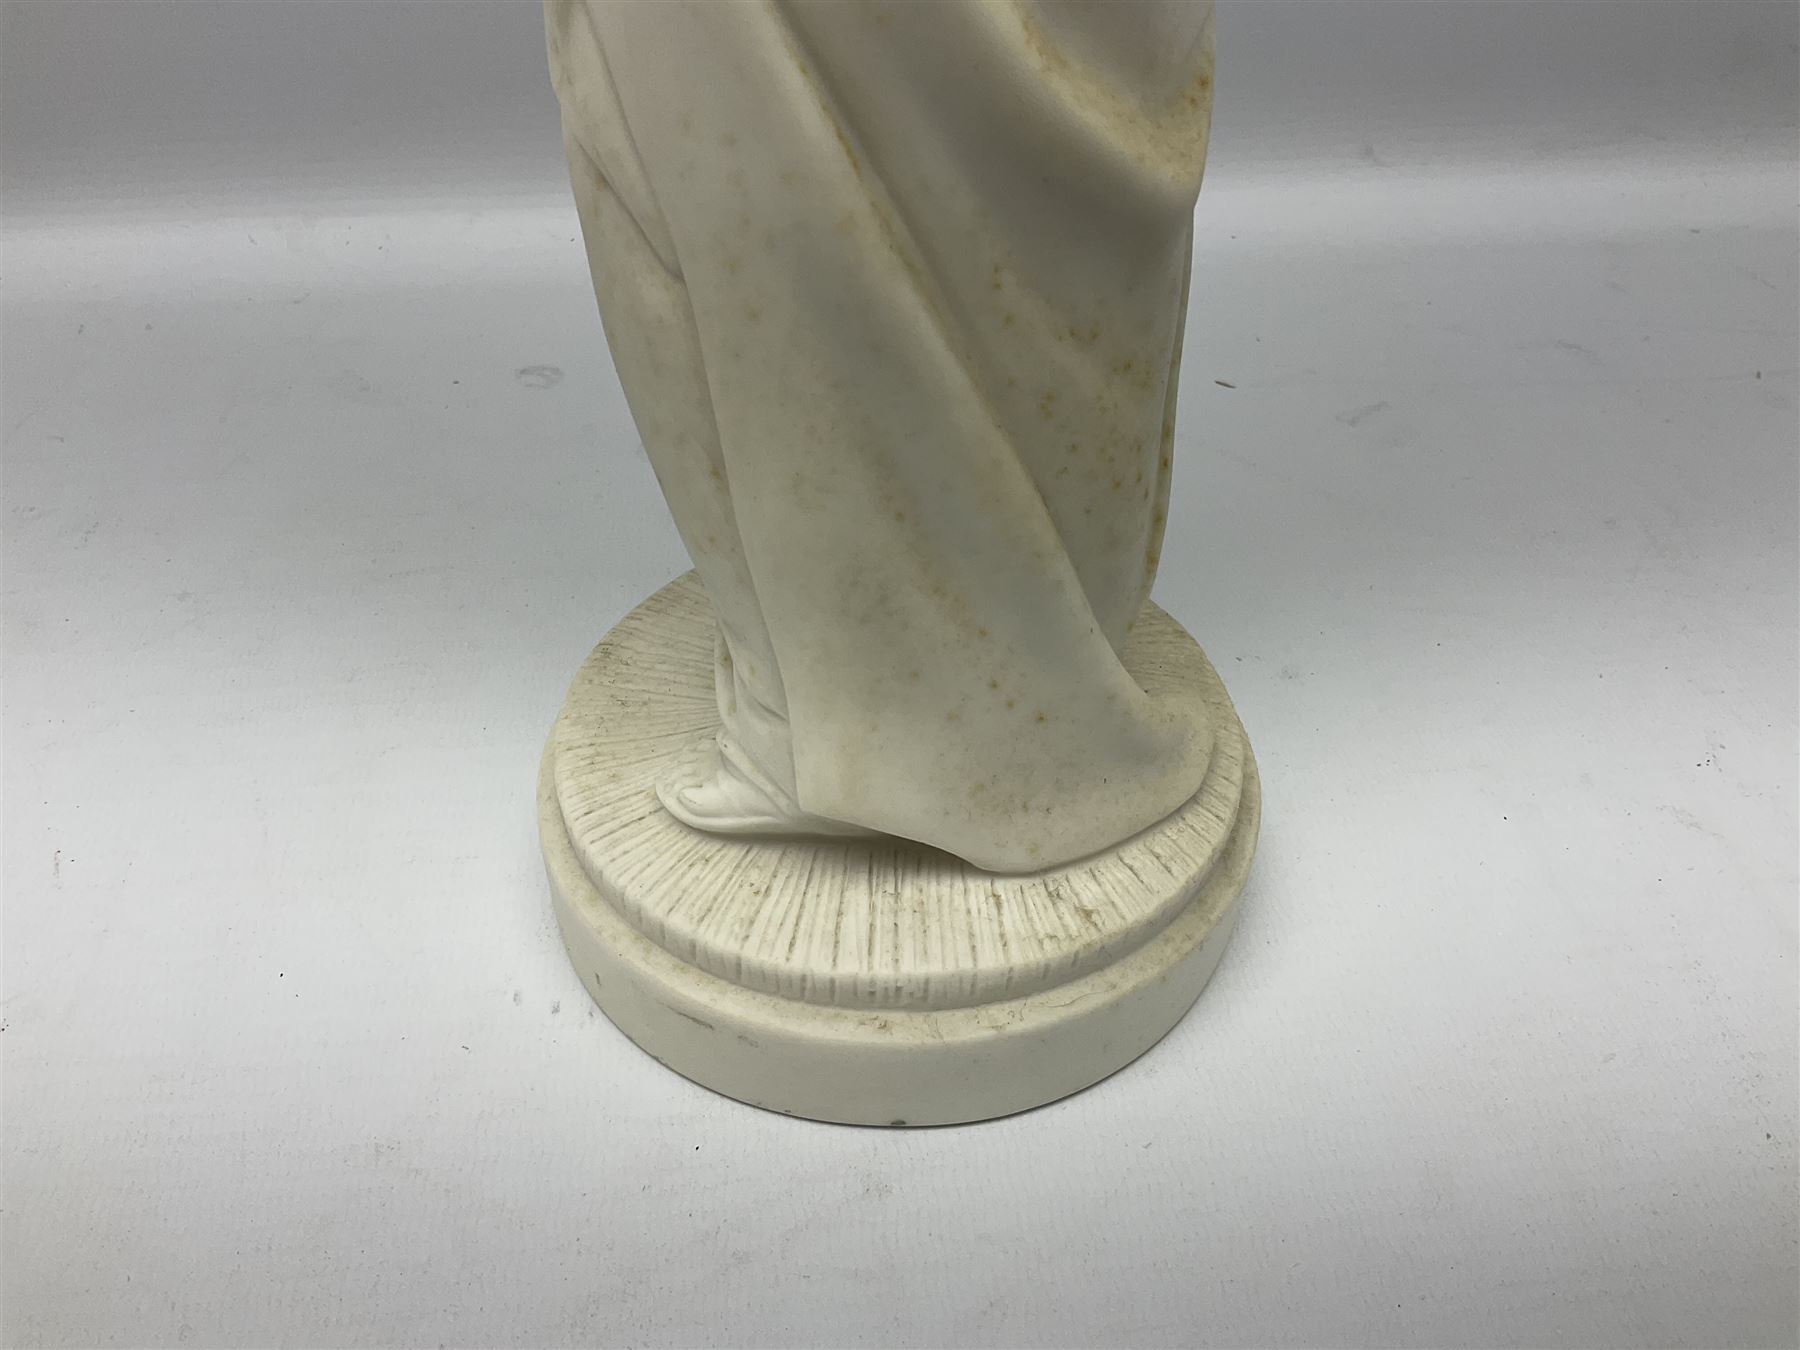 Parian ware figure of a woman in classical dress with one hand raised - Image 7 of 8